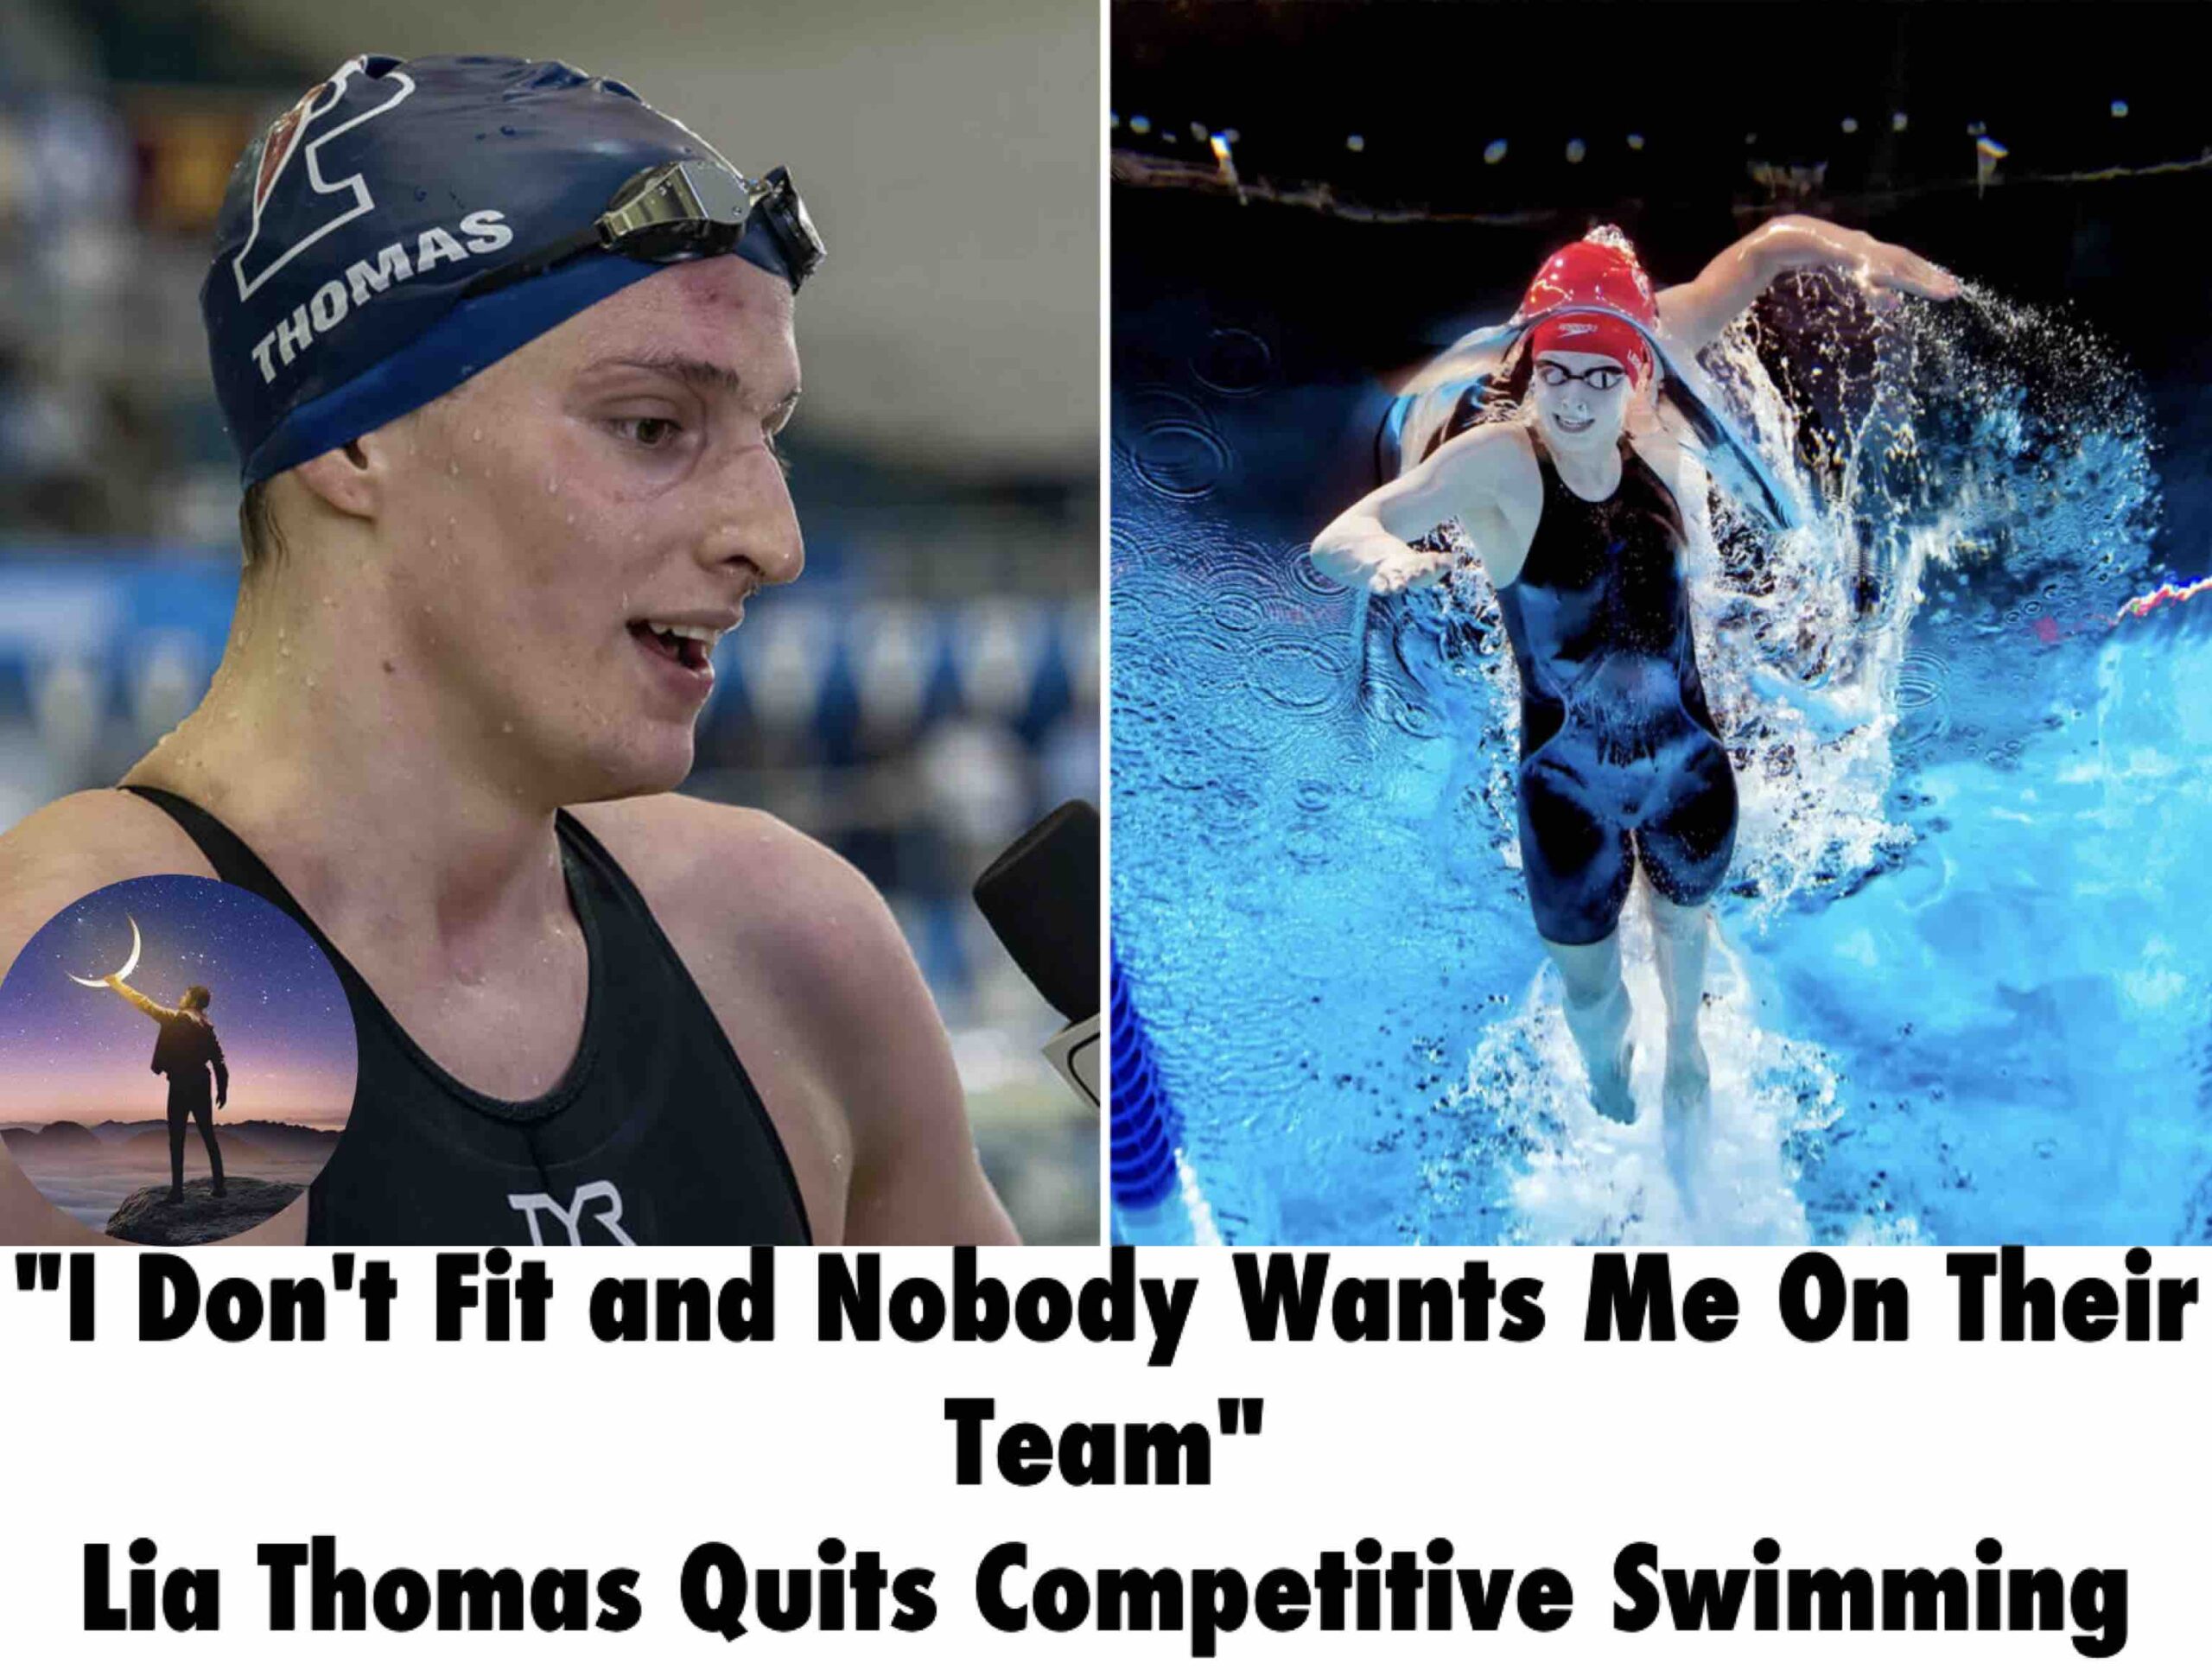 “Nobody Wants Me On Their Team”: Lia Thomas Makes an Exit from Competitive Swimming